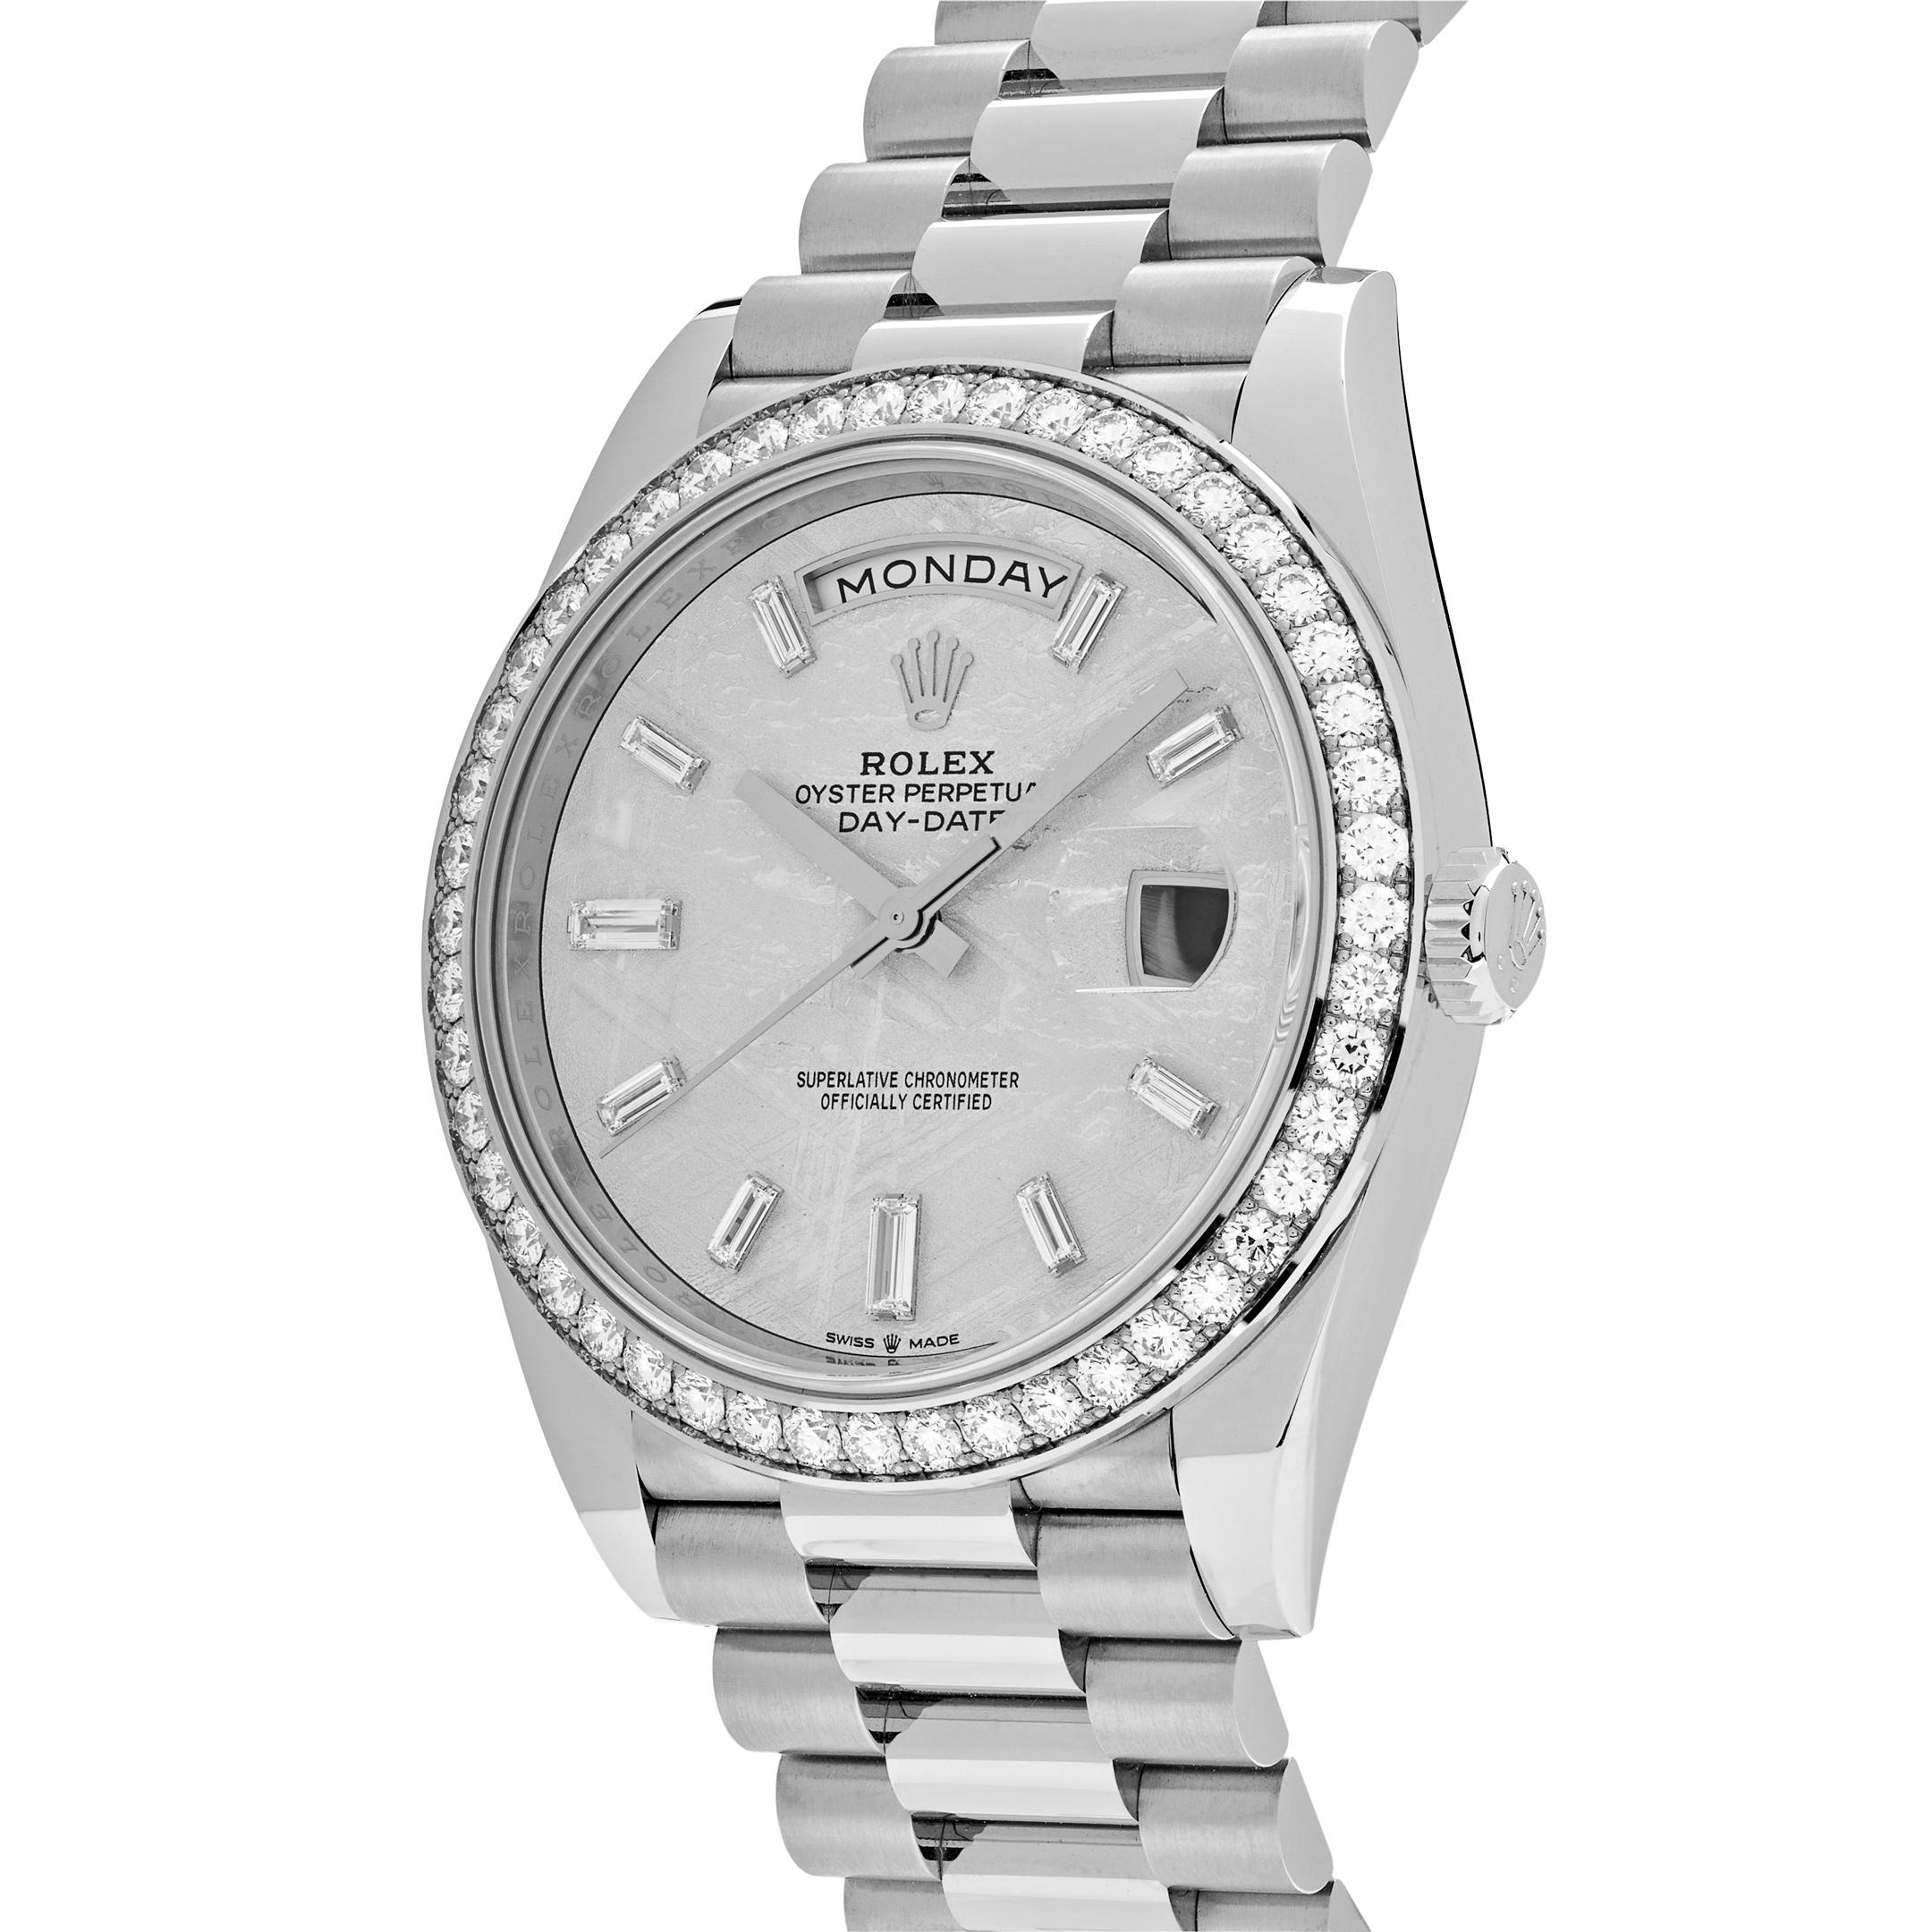 This Rolex Presidential Day-Date is inlaid in a 40mm 18ct white gold case, designed with a unique meteorite design dial set with 10 baguette-cut diamonds, scratch-proof sapphire crystal, a diamond bezel and automatic movement. The signature